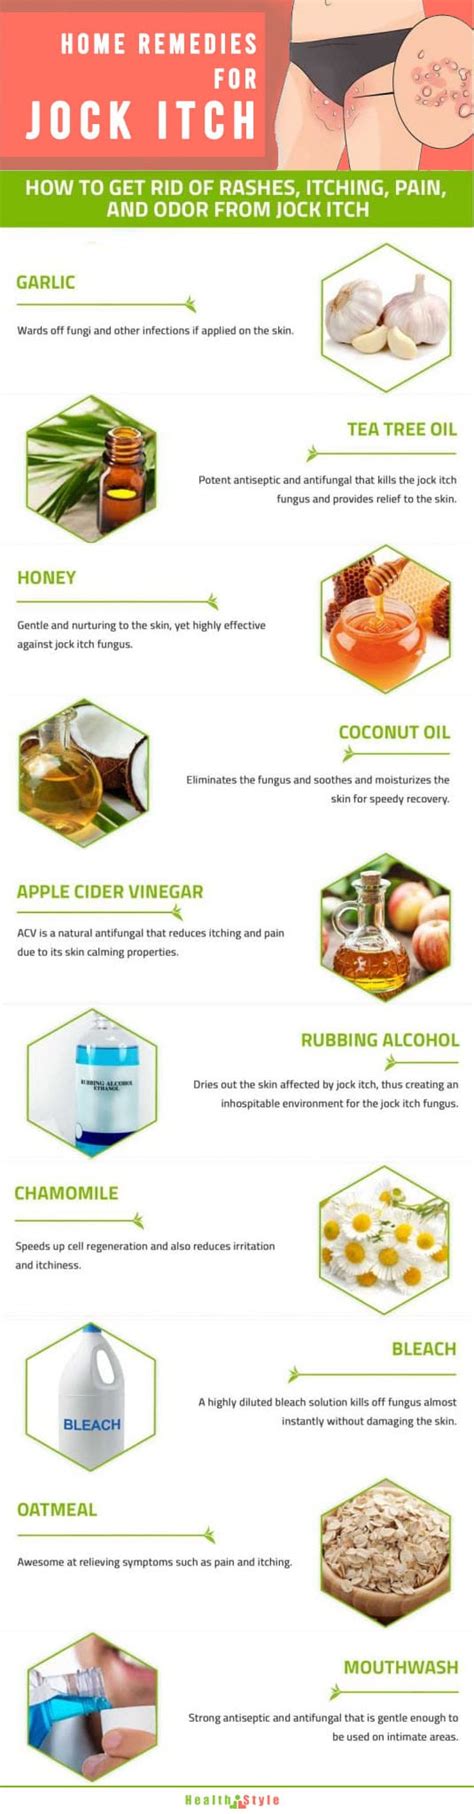 Top 10 Home Remedies For Jock Itch Infographic Healthtostyle